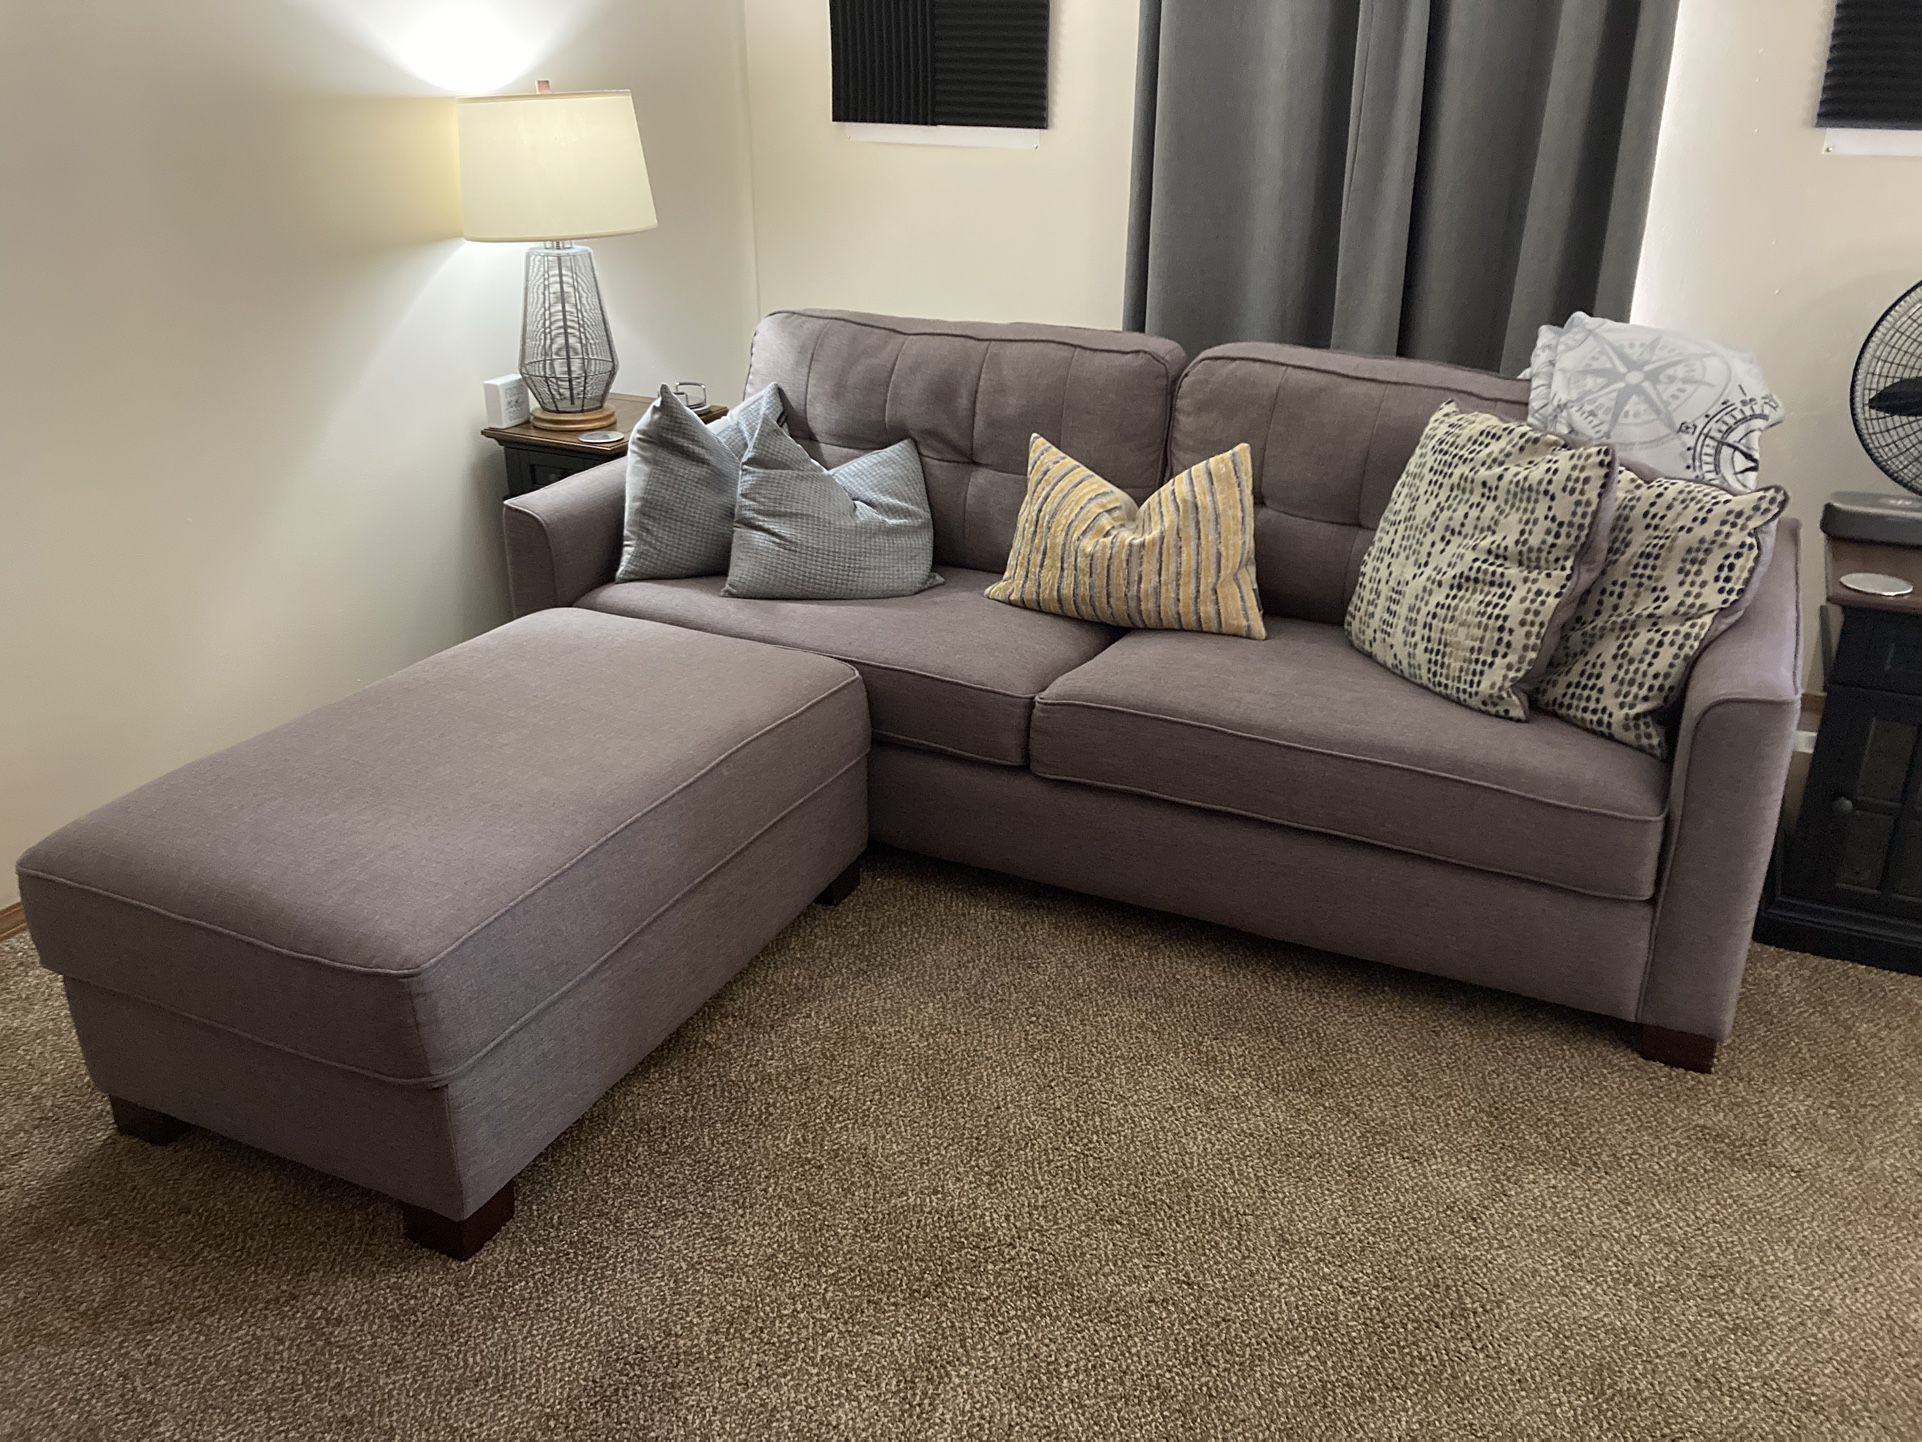 Large Grey Sectional Sofa with Storage Ottoman